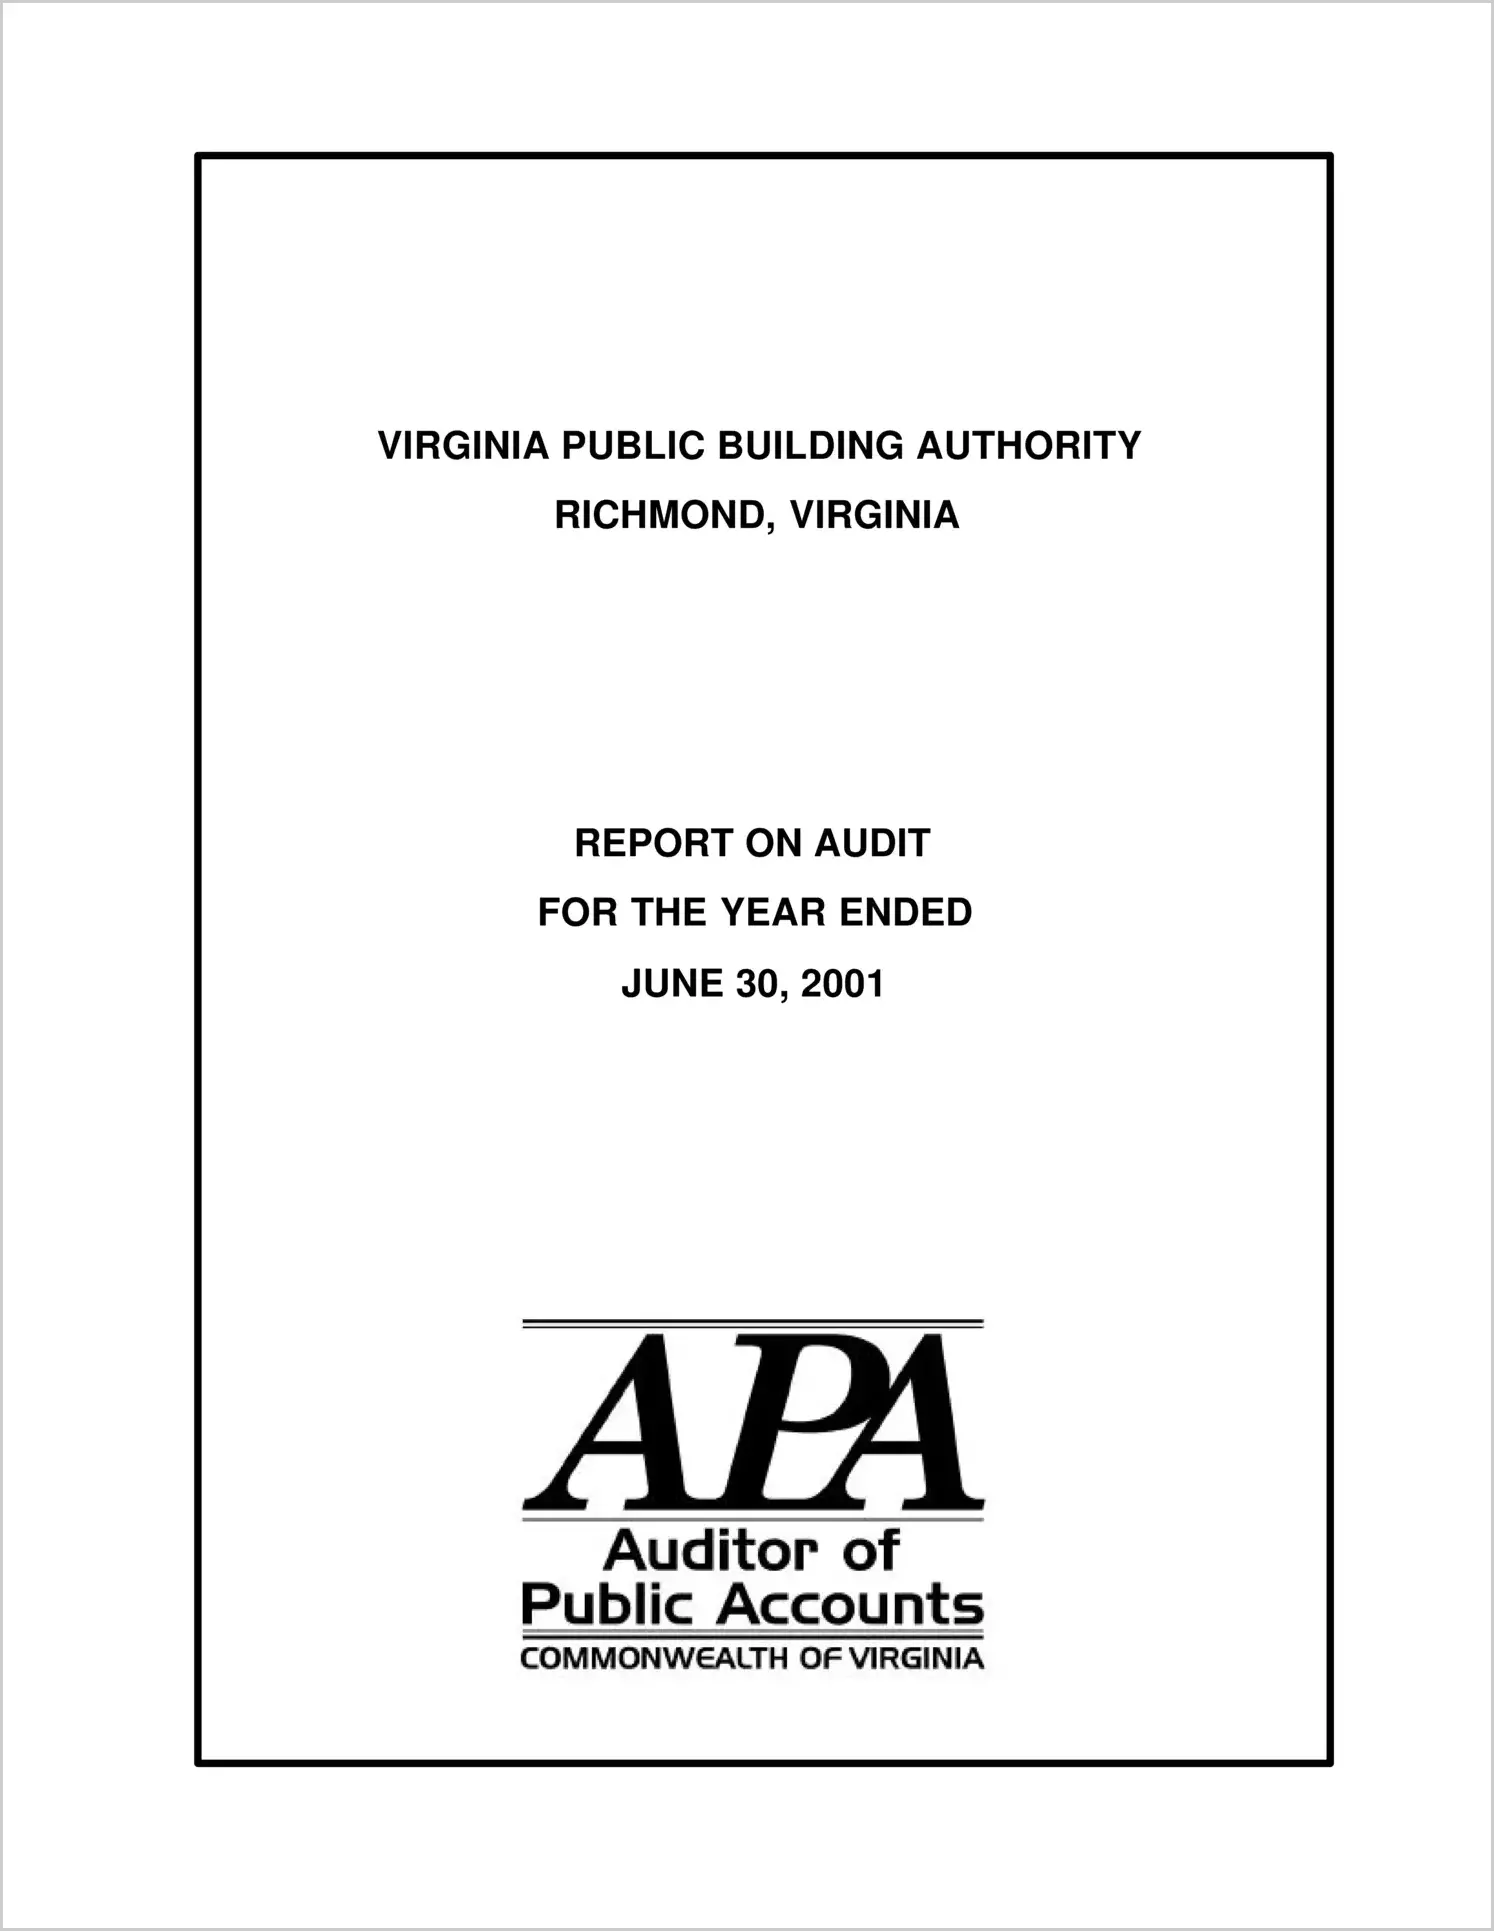 Virginia Public Building Authority for the year ended June 30, 2001